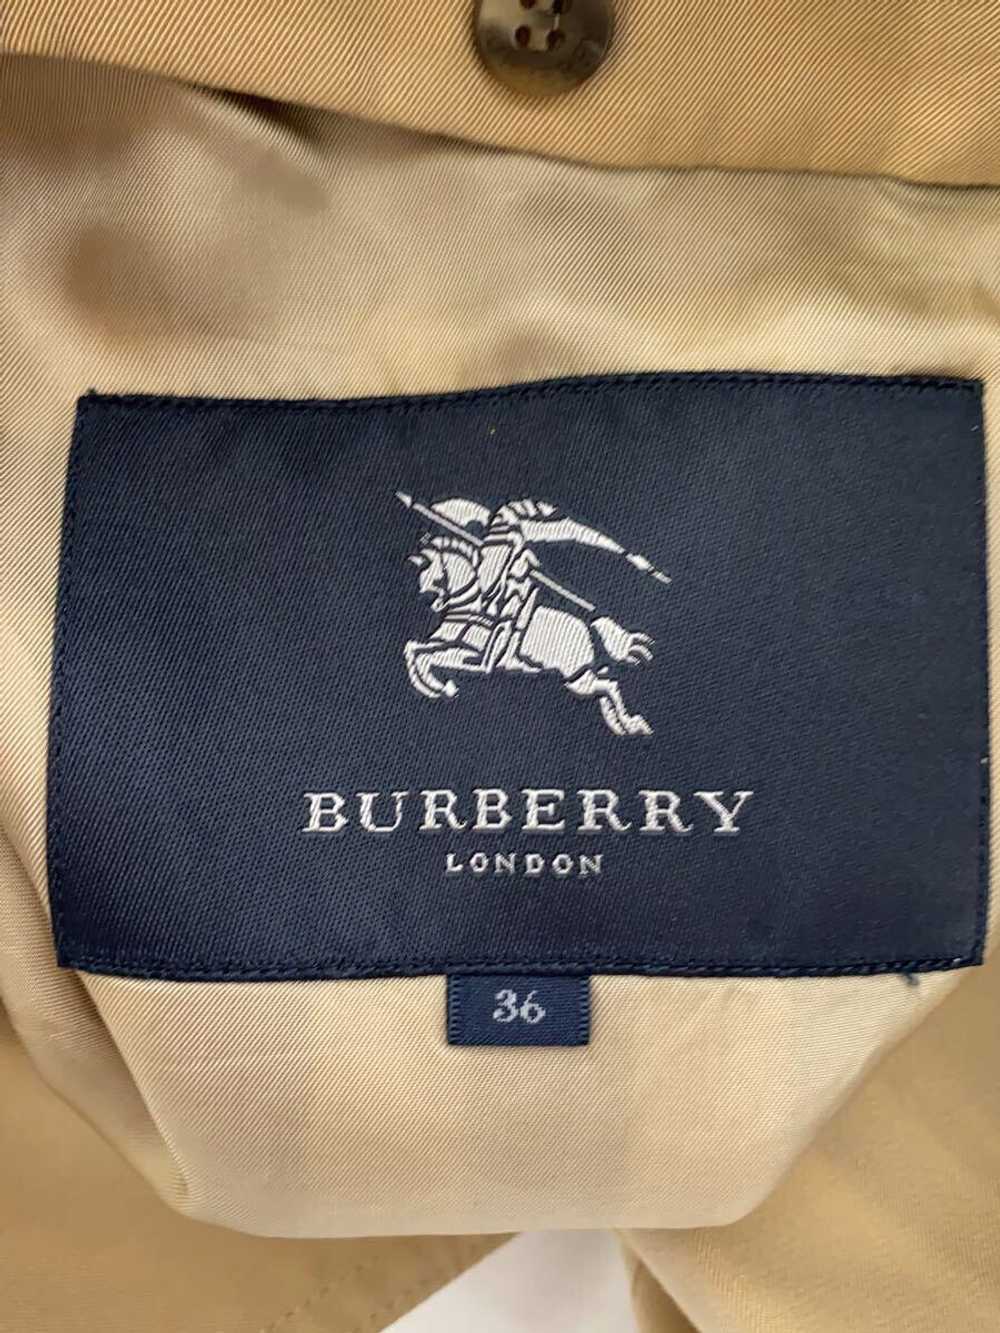 Burberry  London Trench Coat 36 Cotton   B1A89 10… - image 3